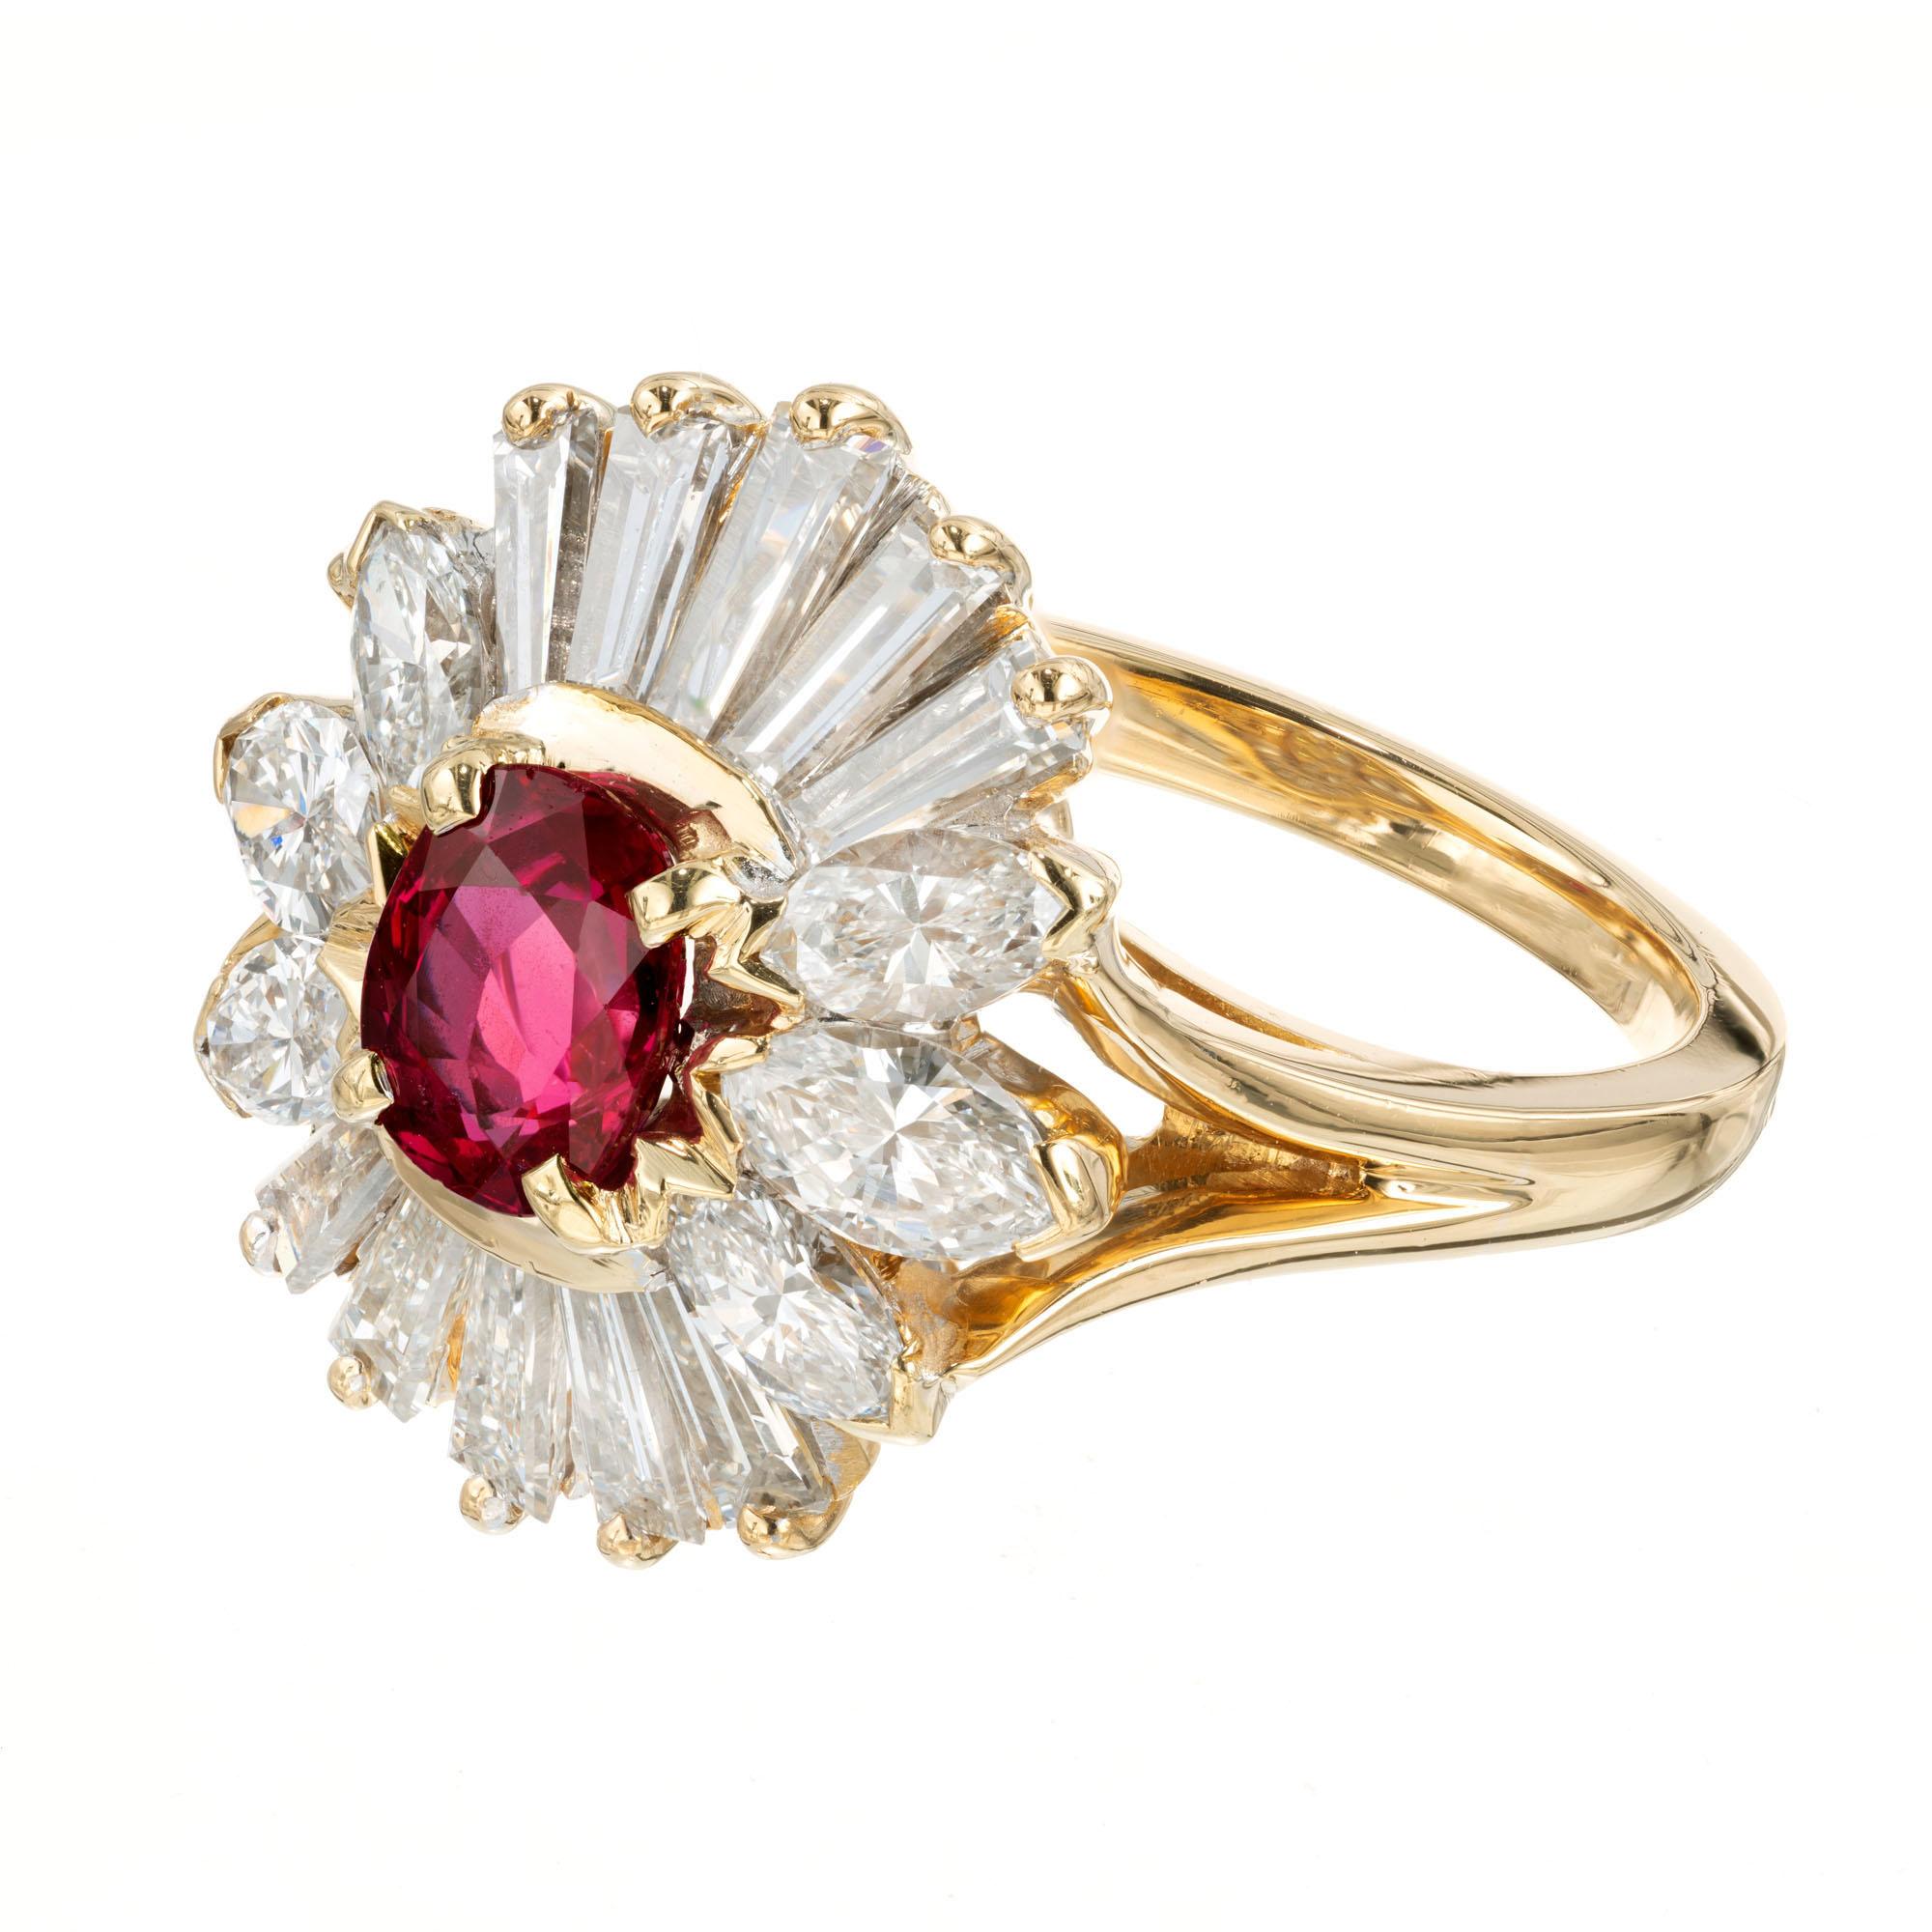 Estate 1960 bright red ruby 18k yellow gold cocktail ring. GIA certified natural ruby simple heat only surrounded by marquise and baguette diamonds. 

1 oval red ruby SI, approx. .80ct GIA Certificate # 2205398694
6 marquise shape diamonds G-H